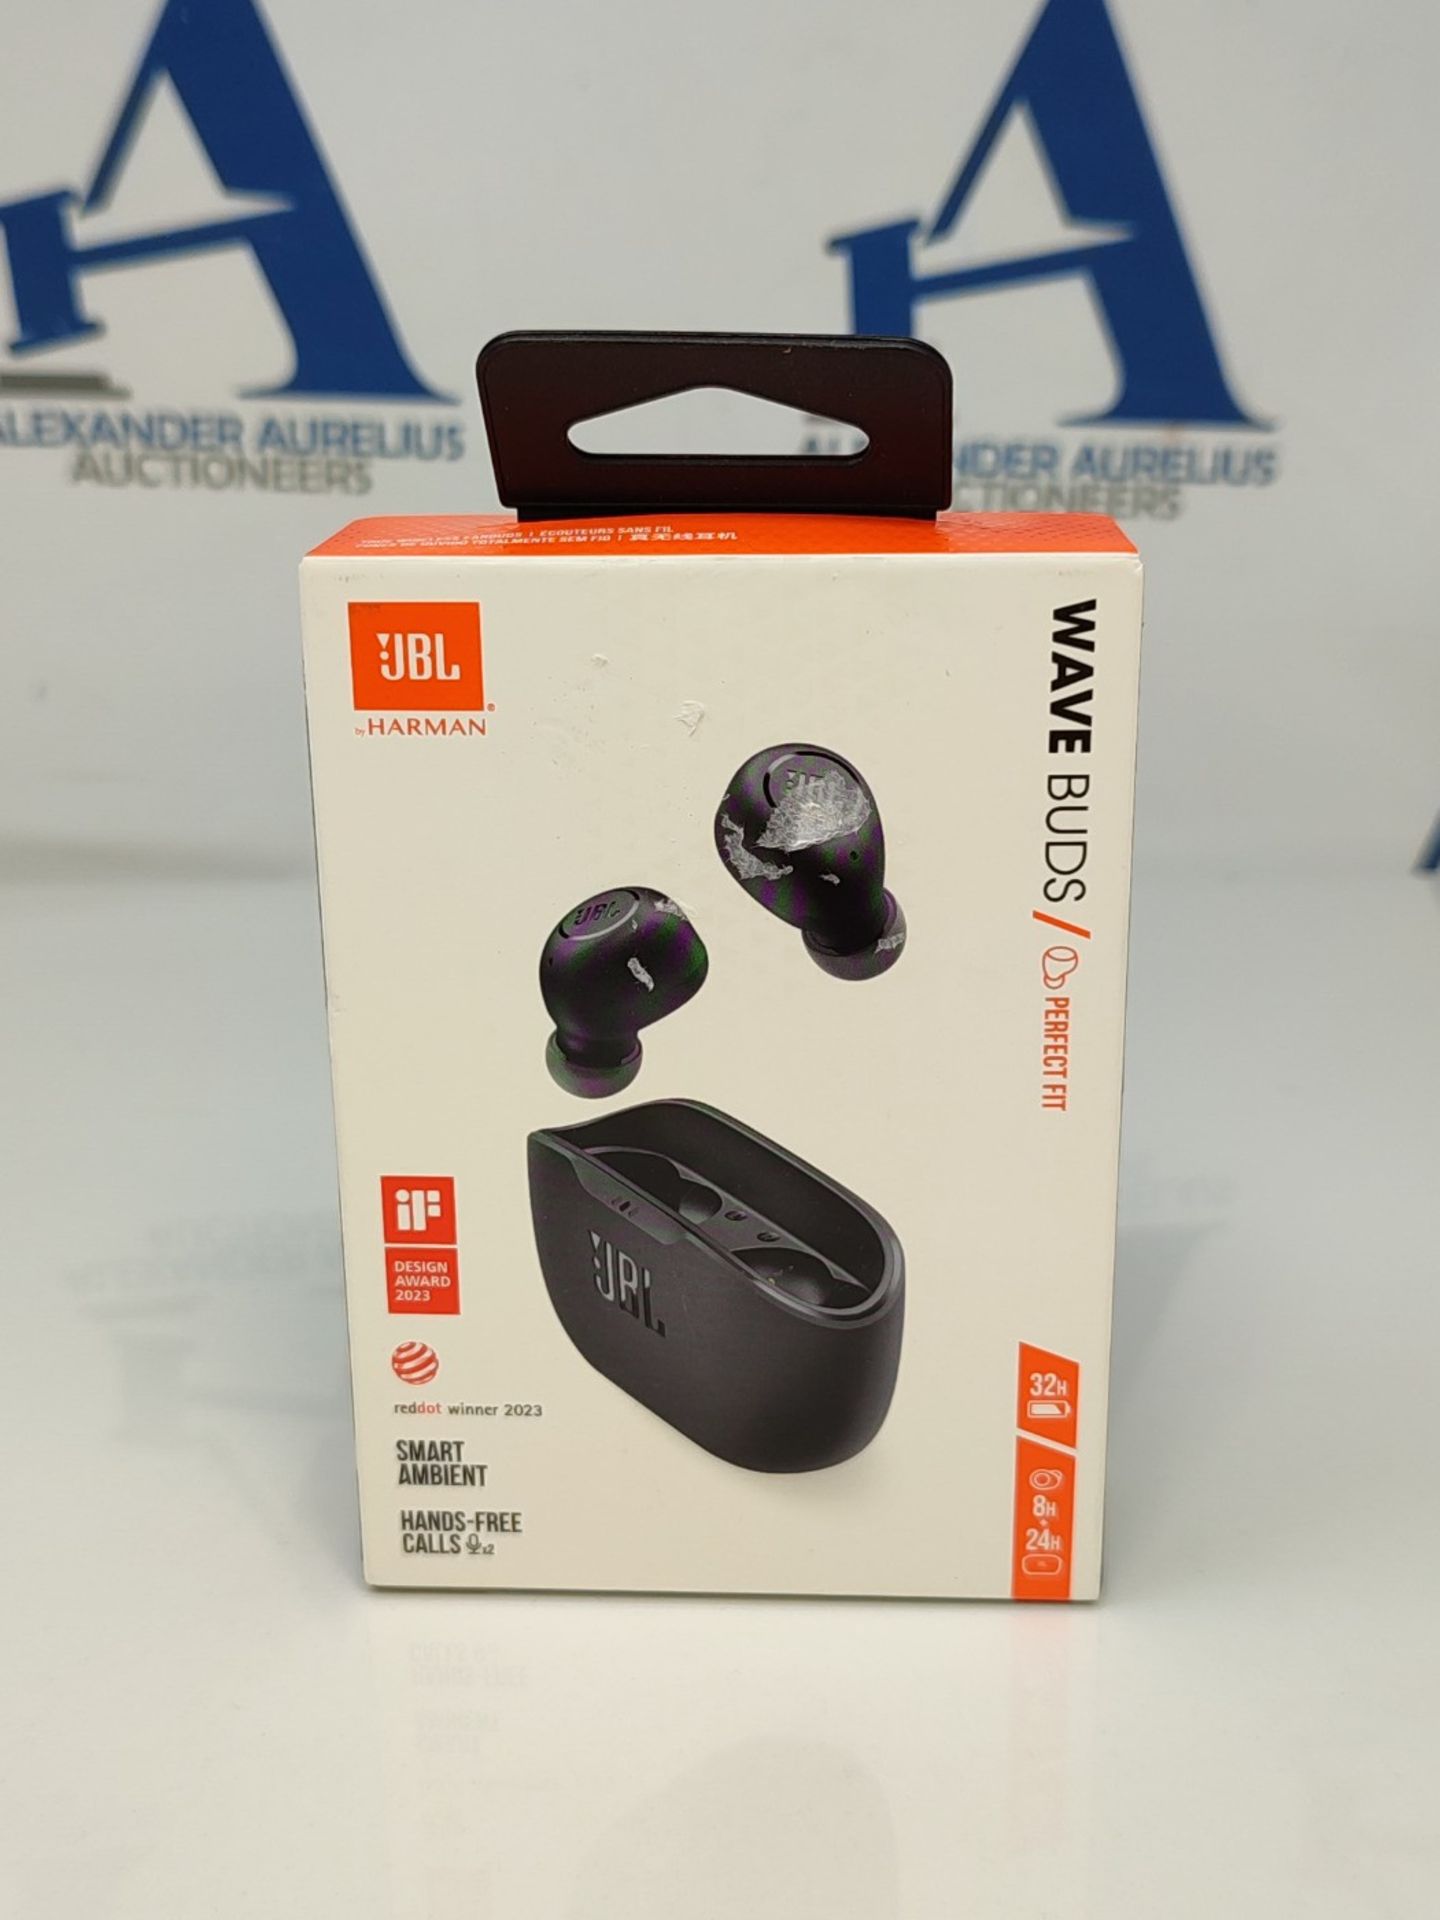 JBL Wave Buds - Wireless In-Ear Earbuds with IP54 and IPX2 waterproofing - Powerful ba - Image 2 of 6